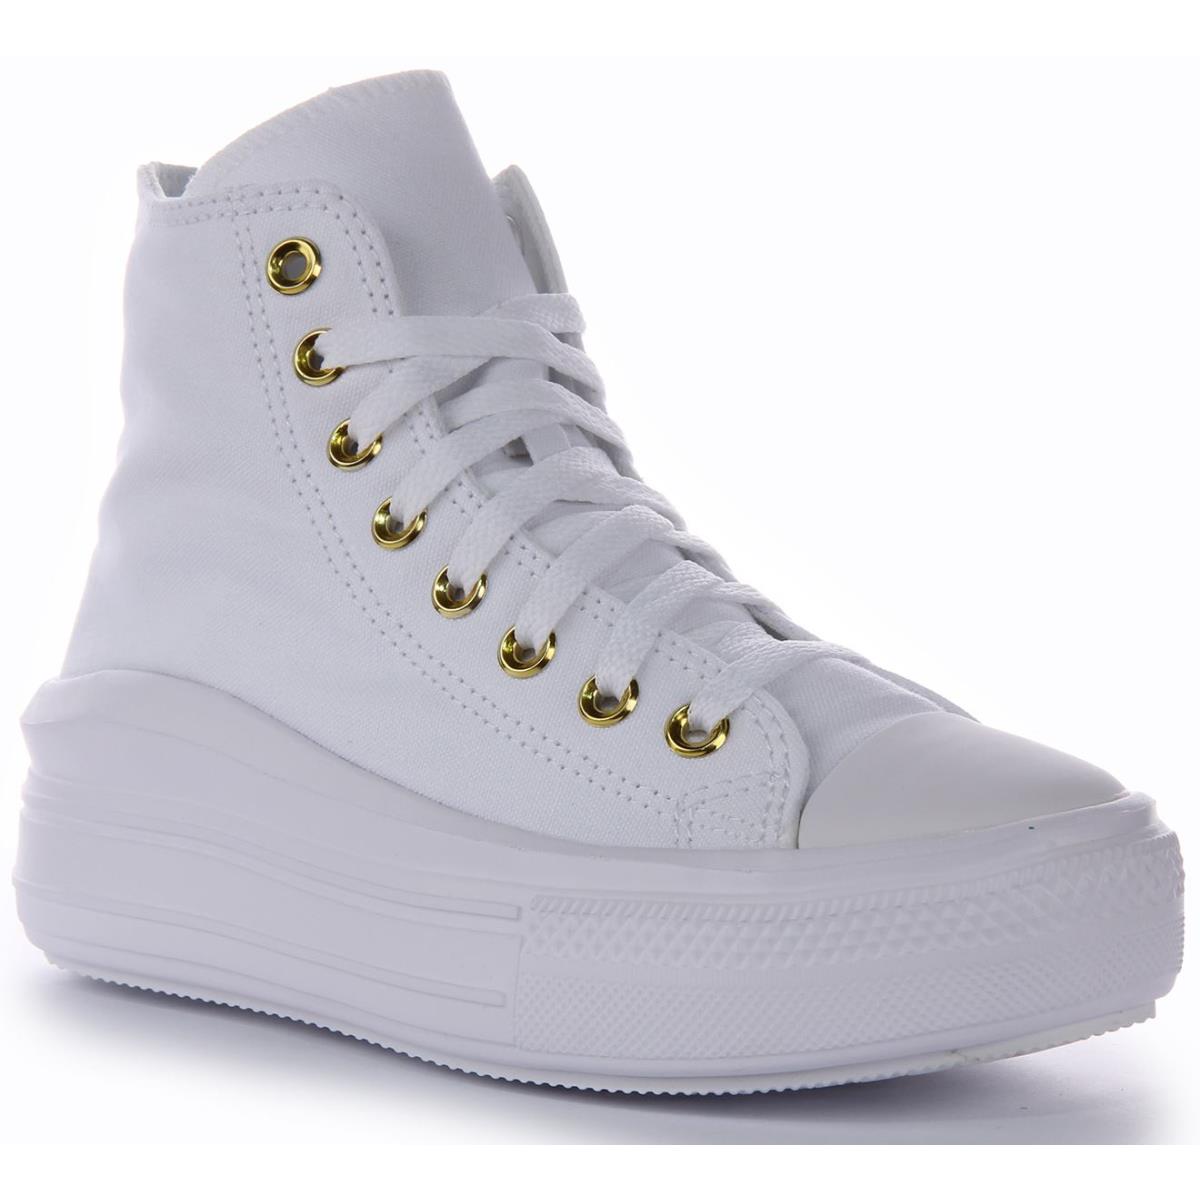 Converse A05459C All Star Move Platform Canvas Shoe White Gold Womens US 4 - 9 WHITE GOLD